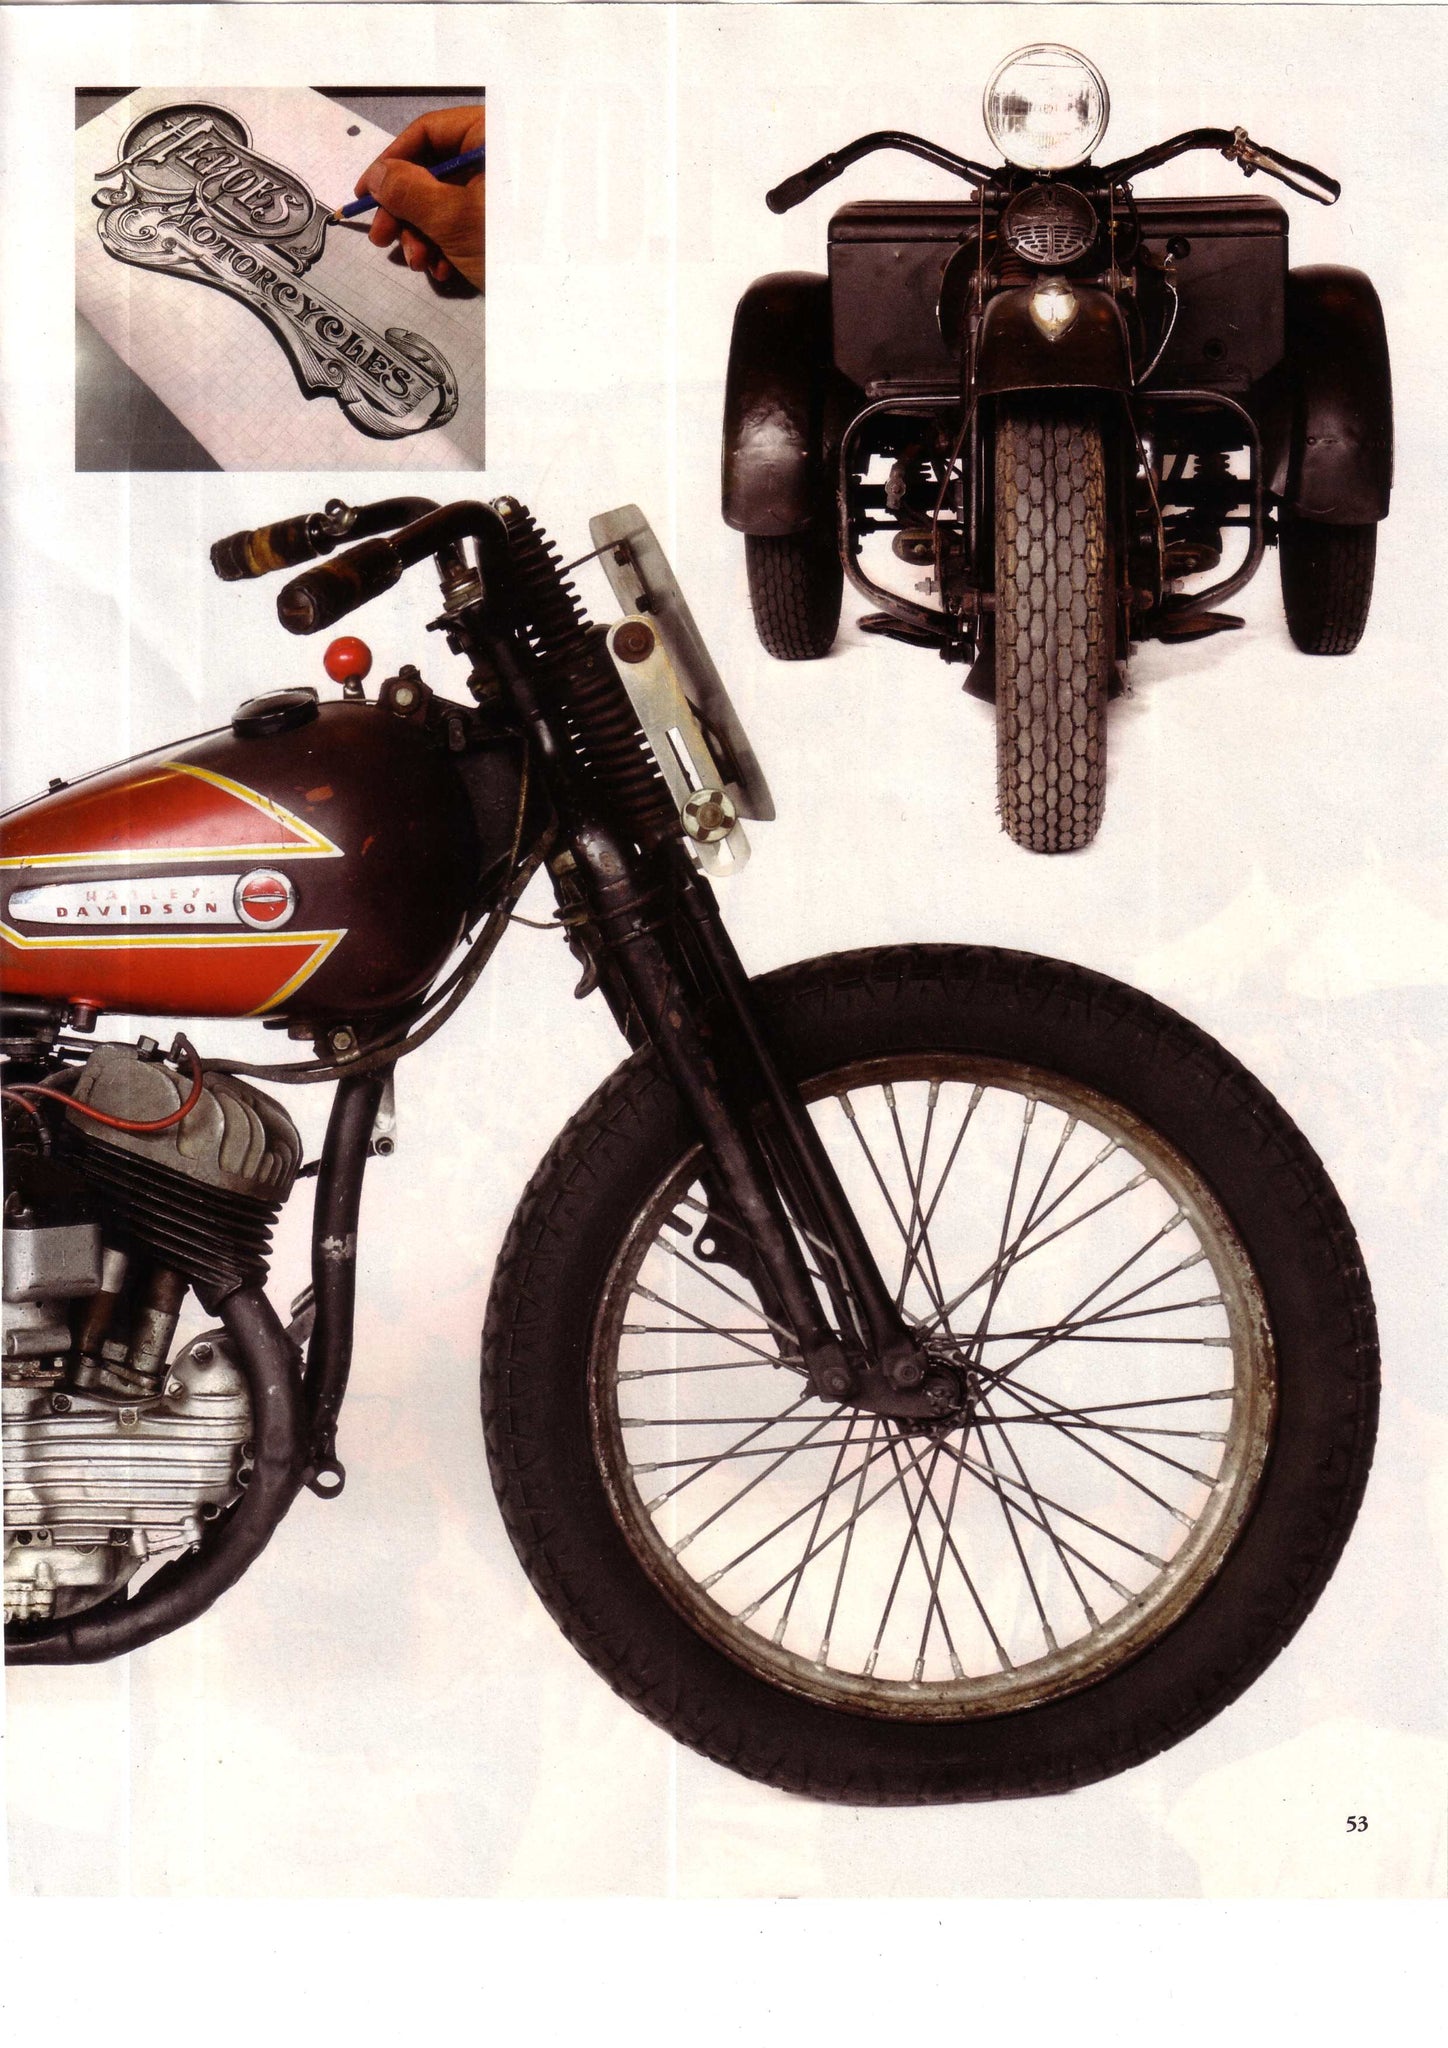 Los Angeles based motorcycle store specializing in restoring and selling vintage motorbikes.